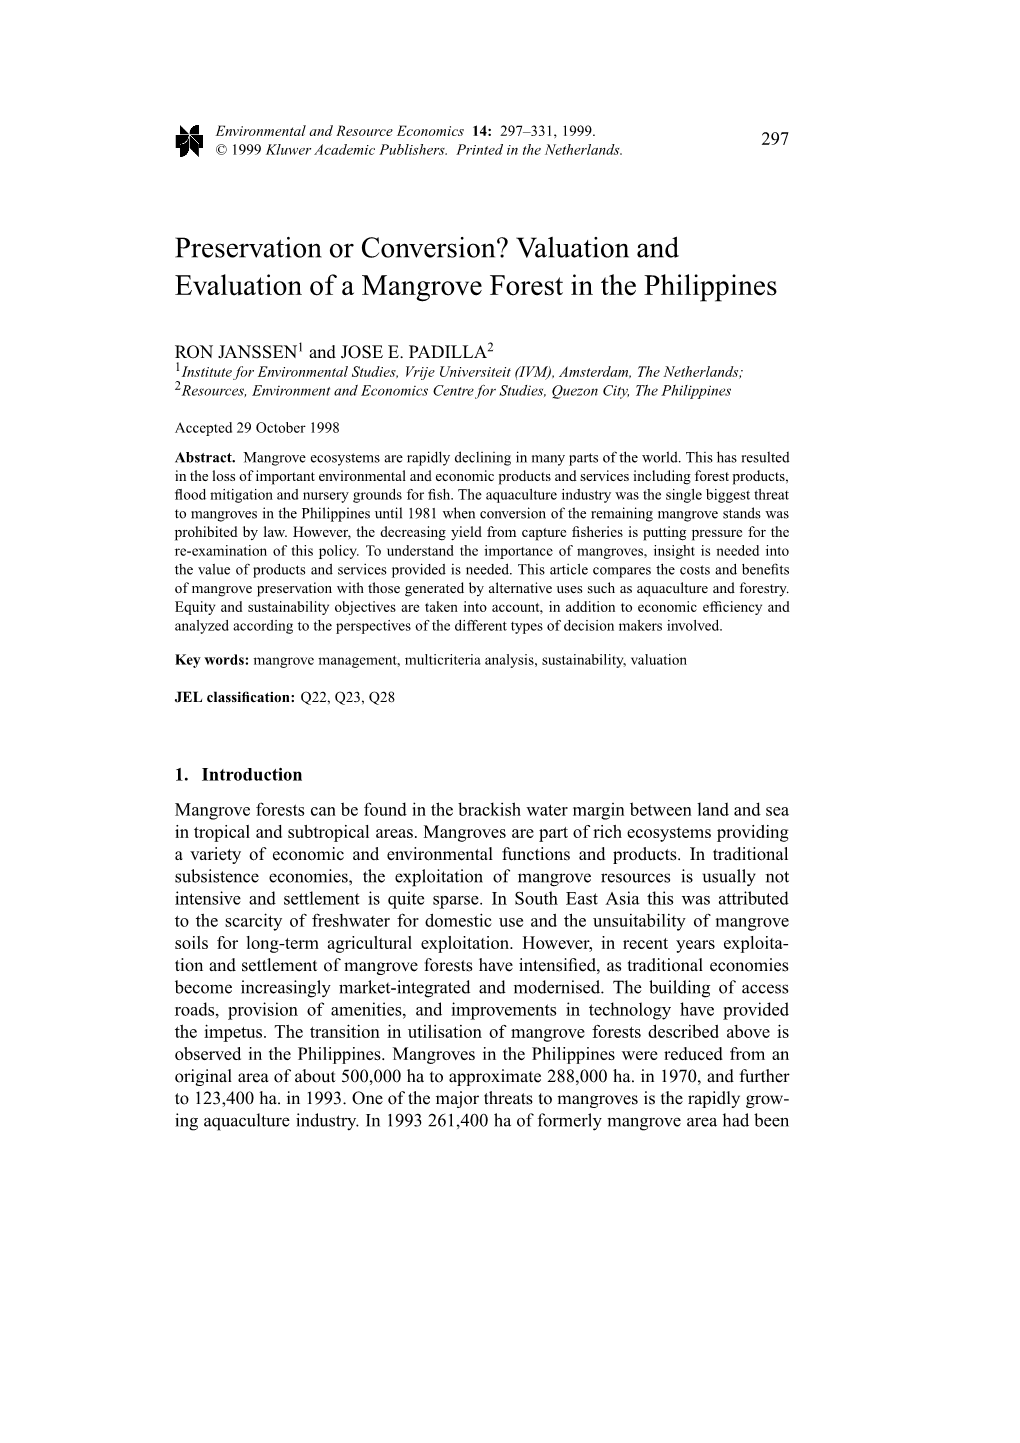 Valuation and Evaluation of a Mangrove Forest in the Philippines